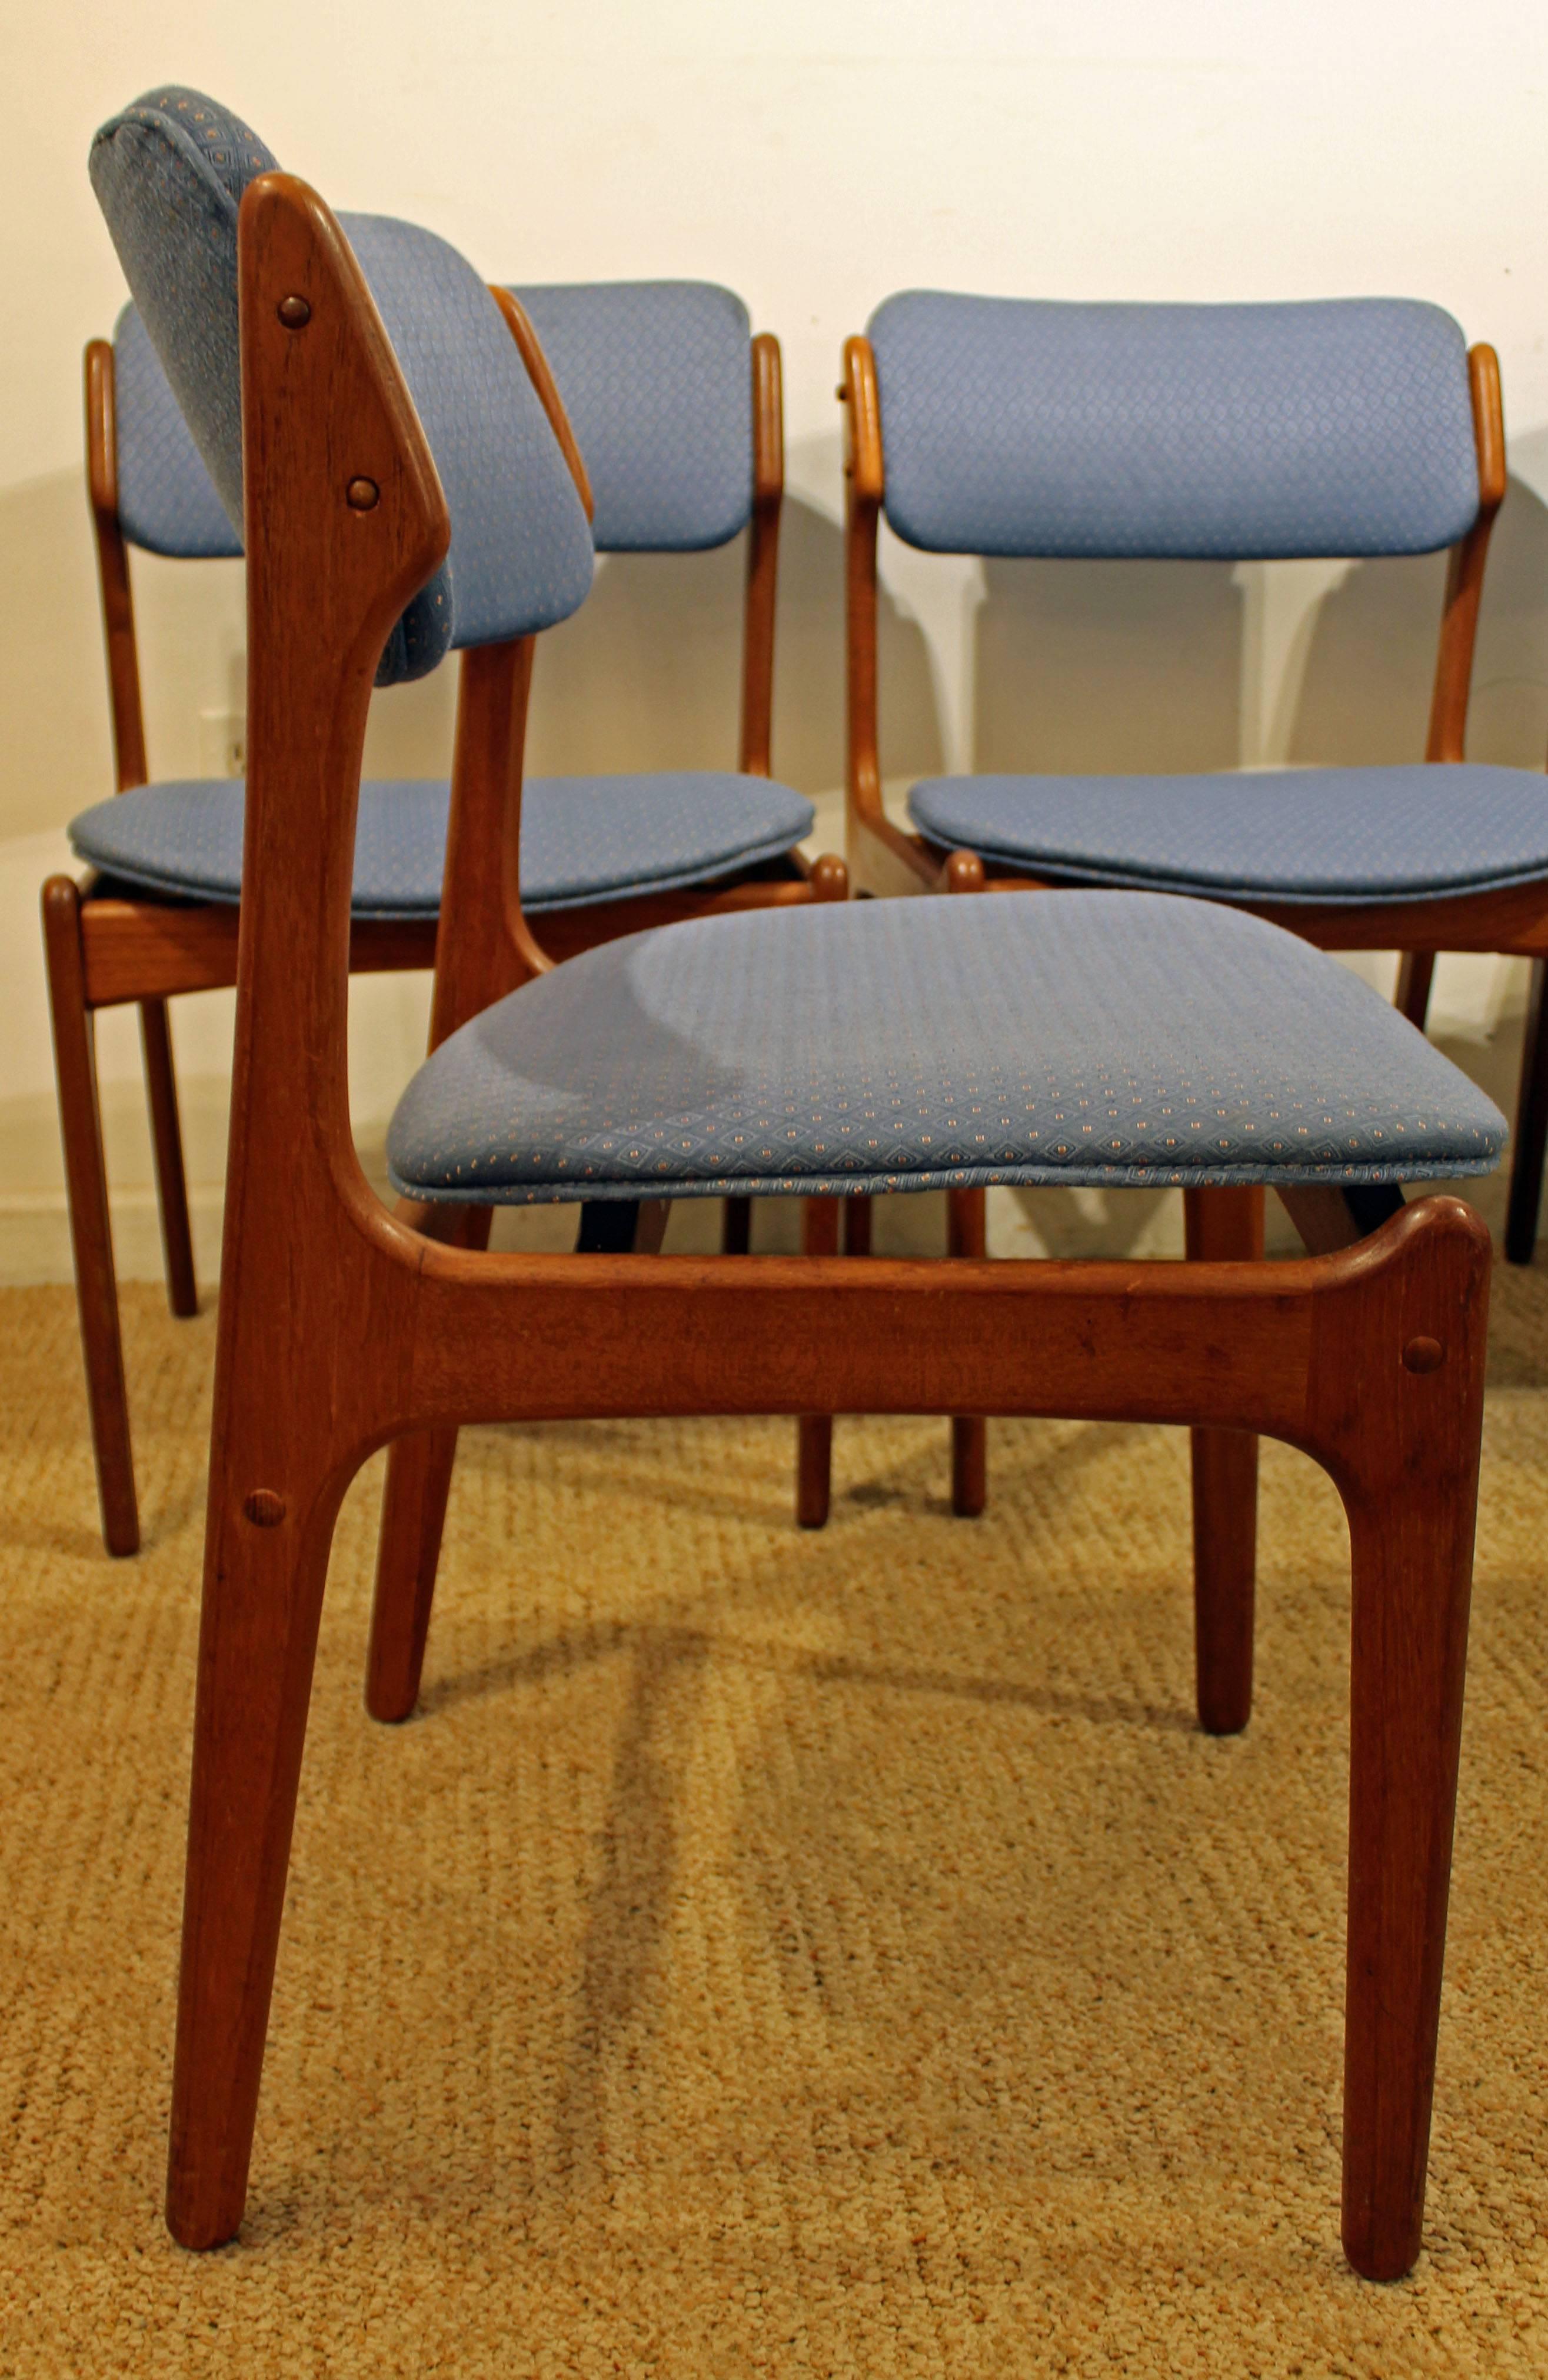 Offered is a set of six Danish modern dining chairs. This set was designed by Erik Buch for Mobler. Includes six teak side chairs with textured blue upholstery. They are in decent condition, but can stand to be reupholstered.

Dimensions:
19